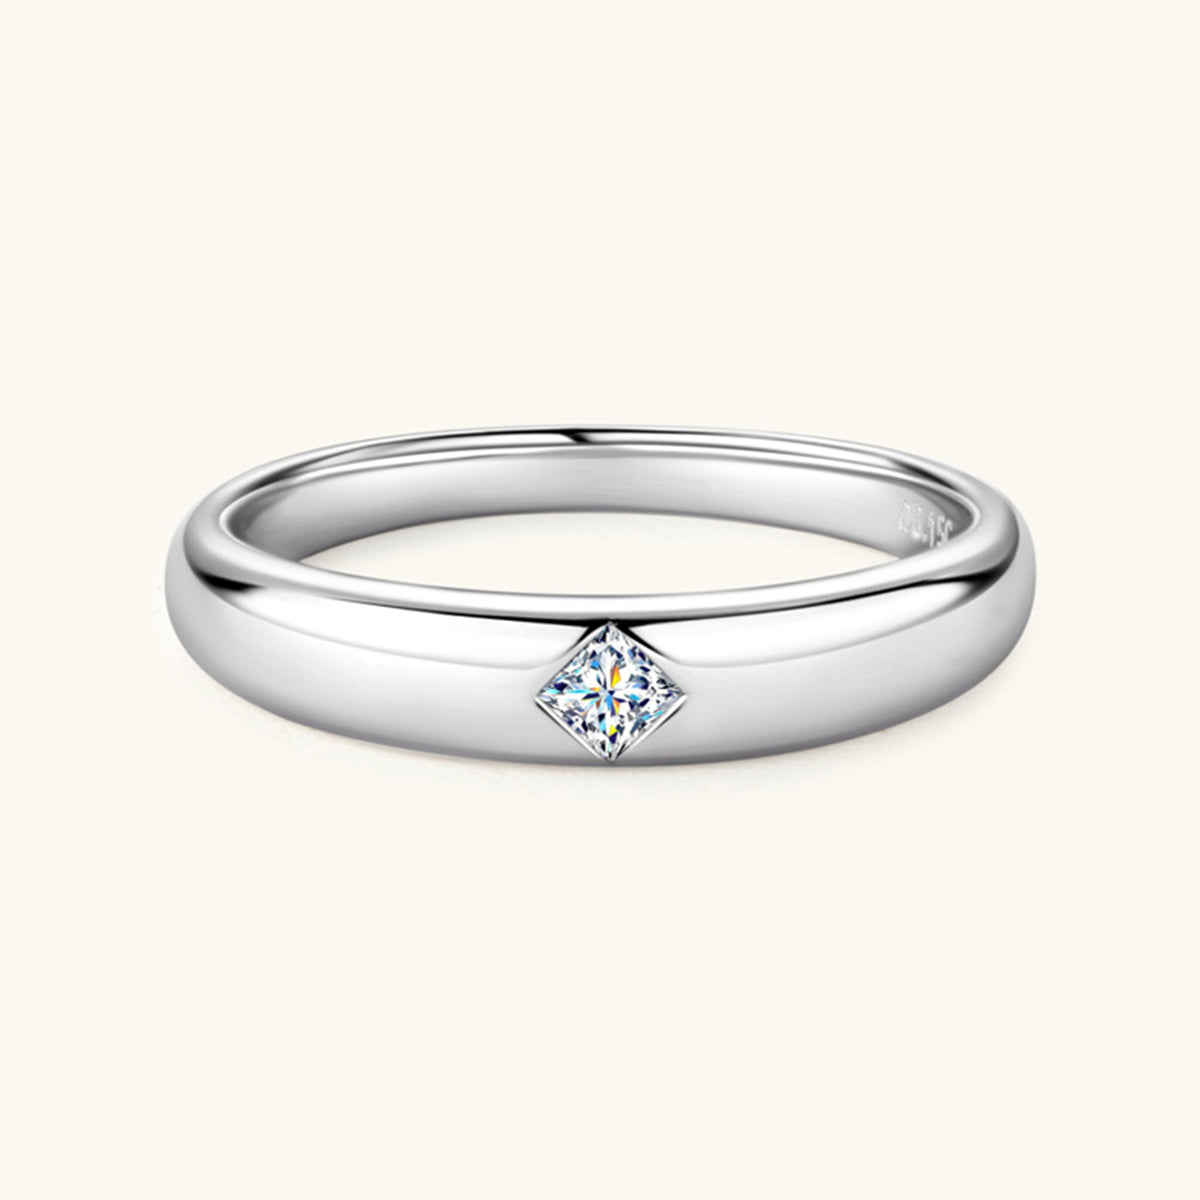 Discover the simple elegance of Marianela's Exclusive Shop, LLC's 925 Sterling Silver Inlaid Moissanite Band Ring. This ring features a small square-cut moissanite stone set at its center, with a smooth and polished band that subtly reflects light.